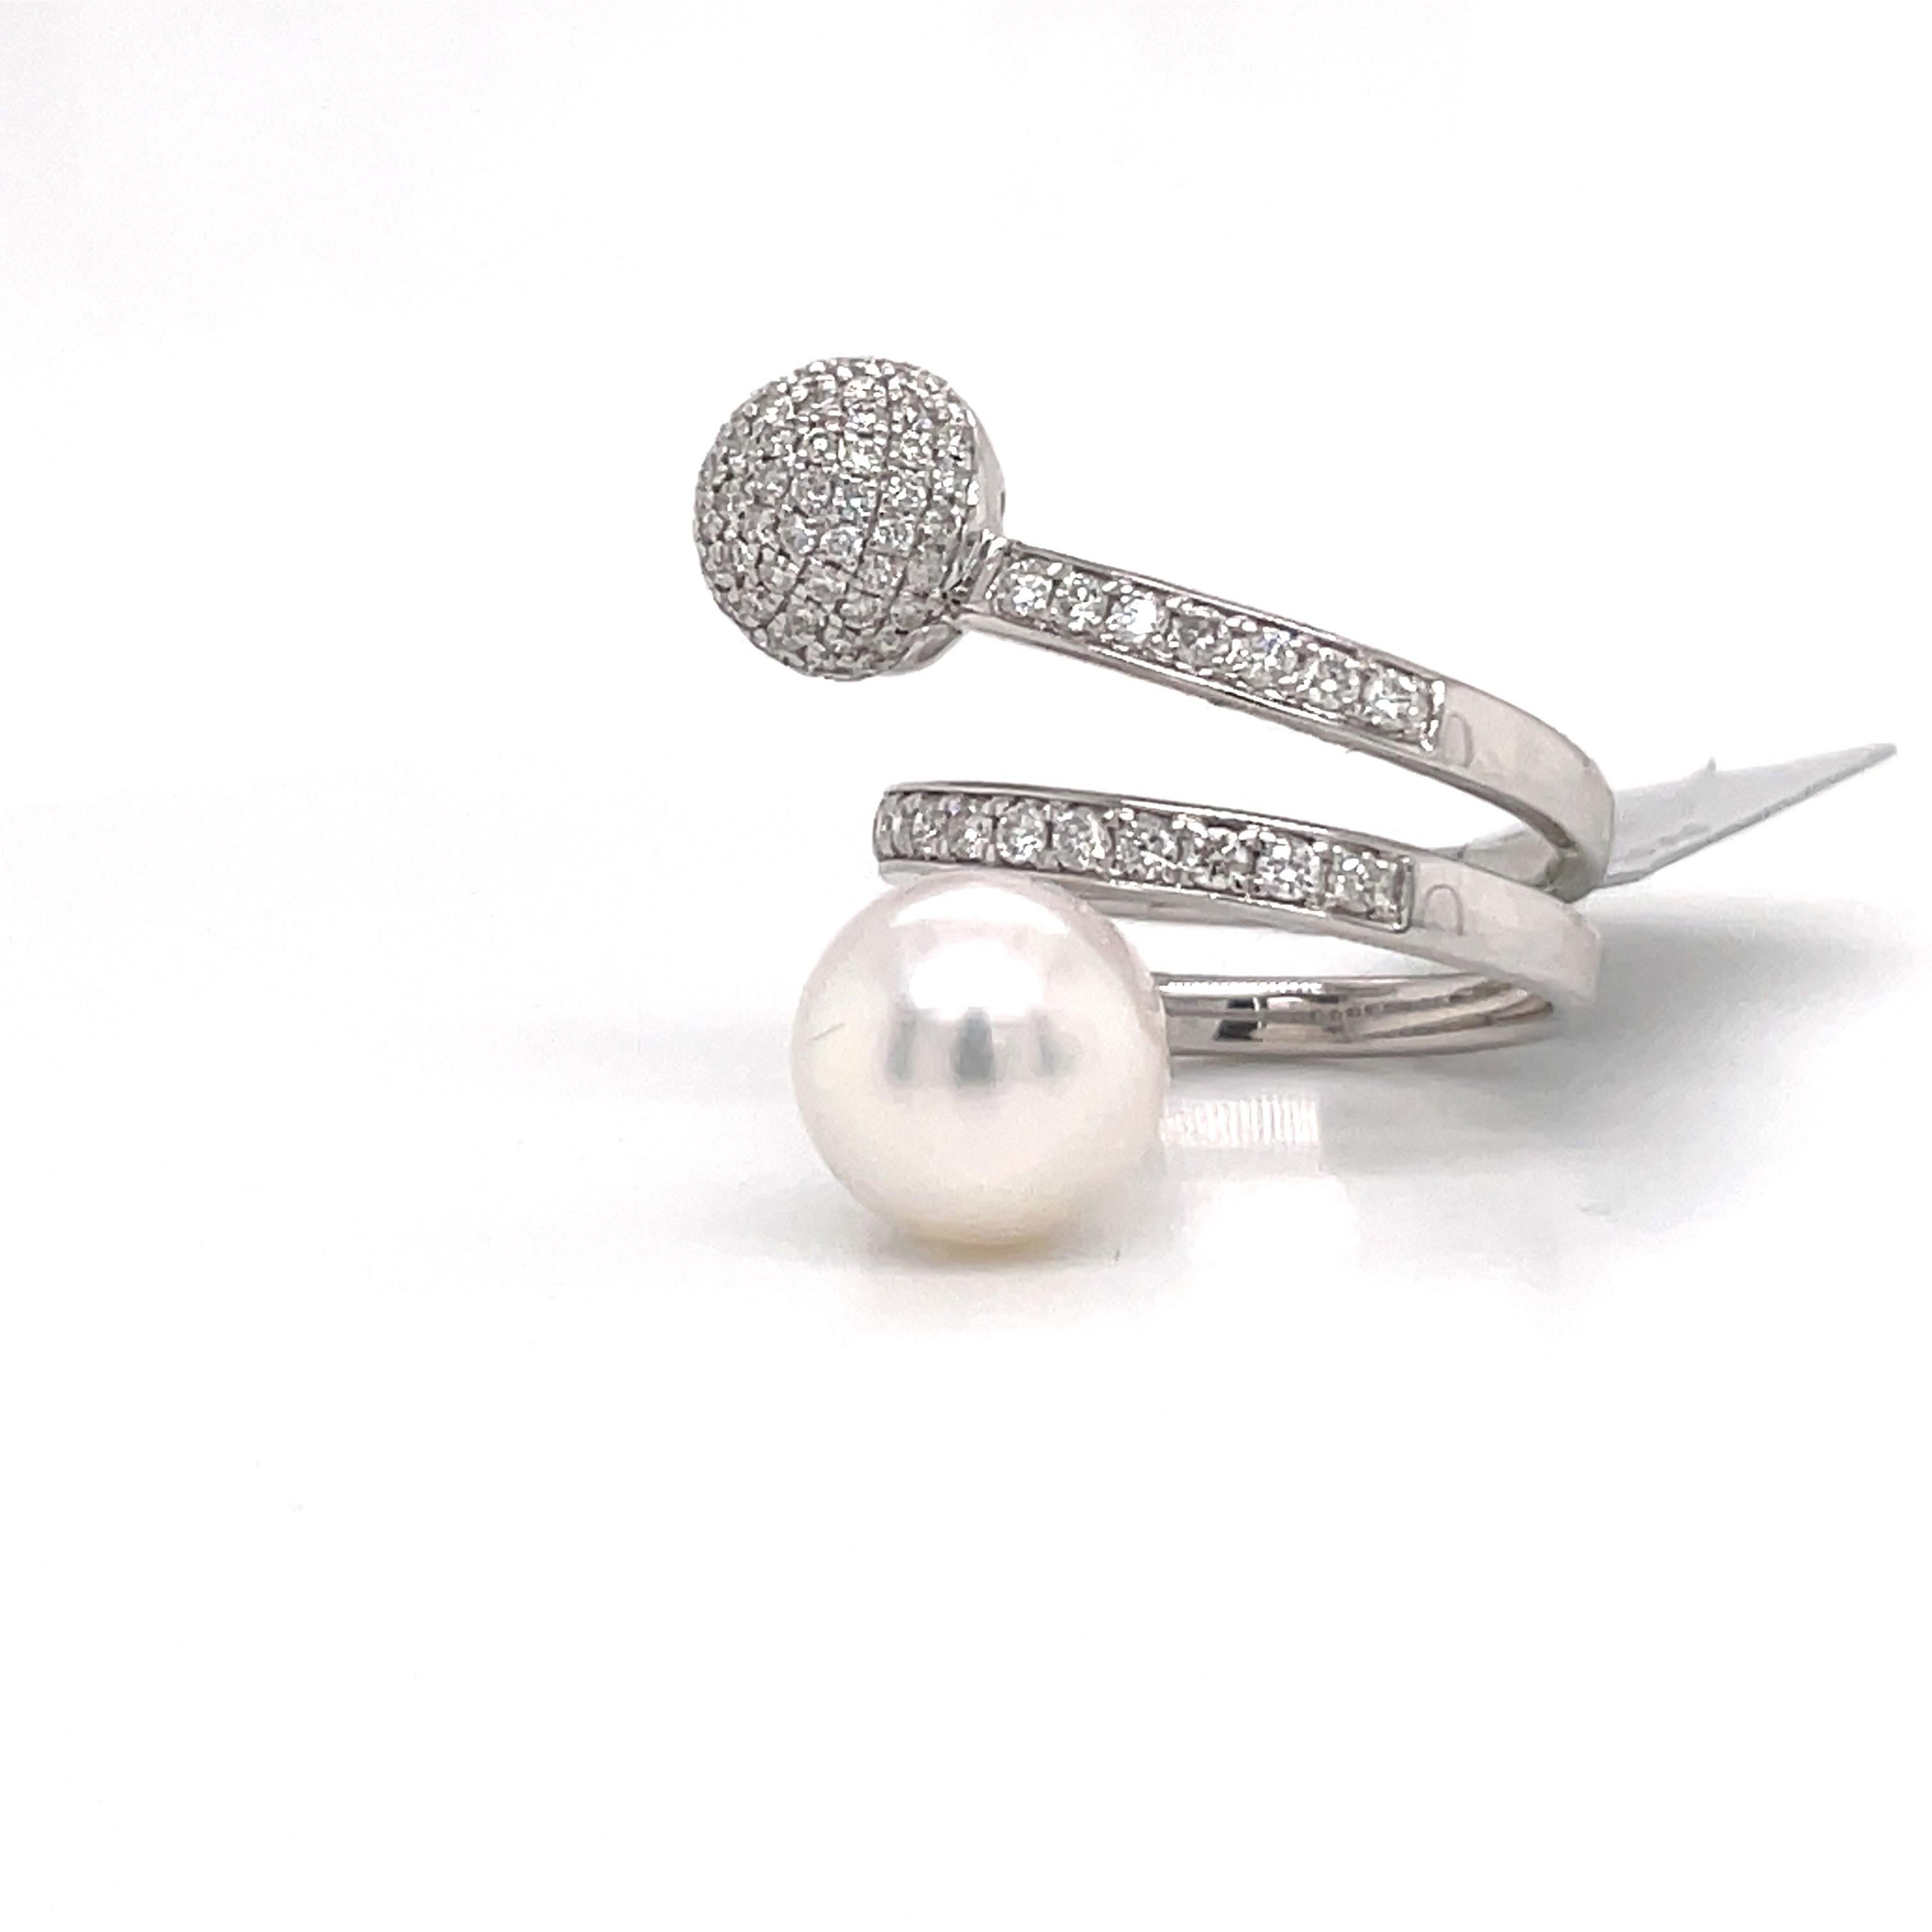 18 Karat White Gold twist fashion ring featuring one white South Sea Pearl measuring 10 MM and numerous round brilliants weighing 1.05 carats.
Color G-H
Clarity SI
Pearl can be changed to Pink Freshwater or Golden South Sea